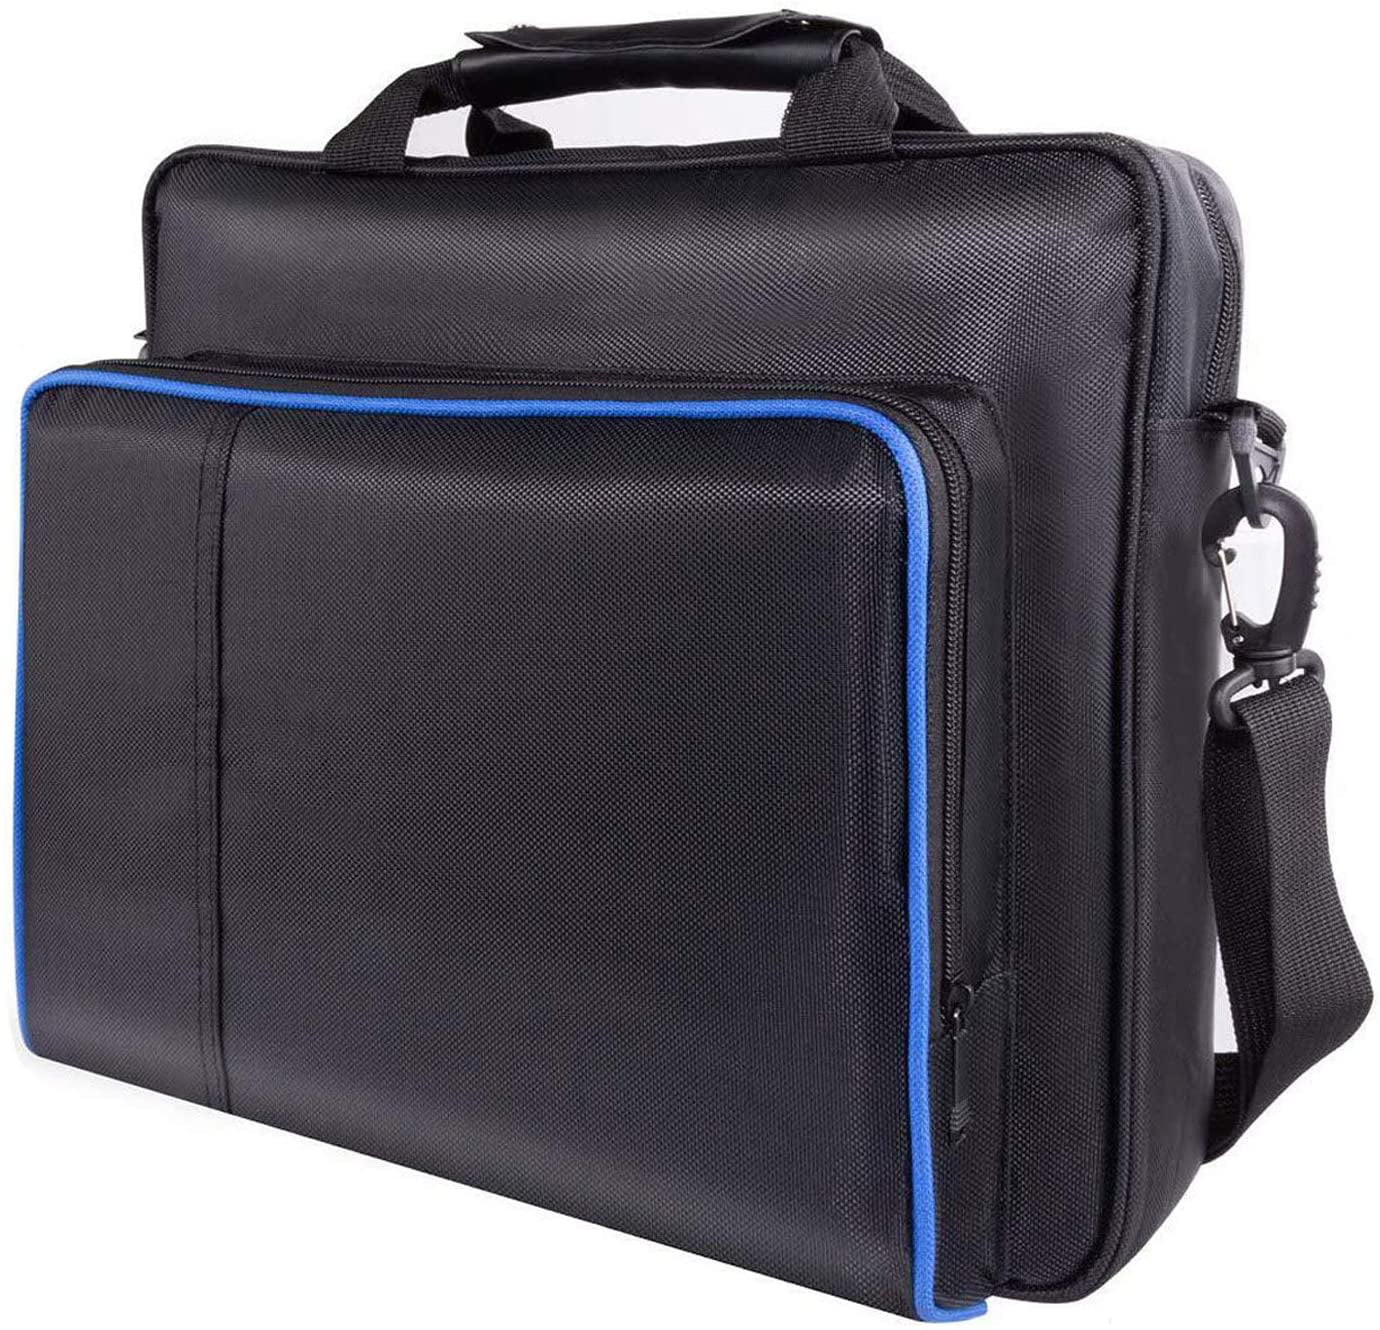 PS4 Pro Bag, PS4 Carrying case, Protective Travel case for